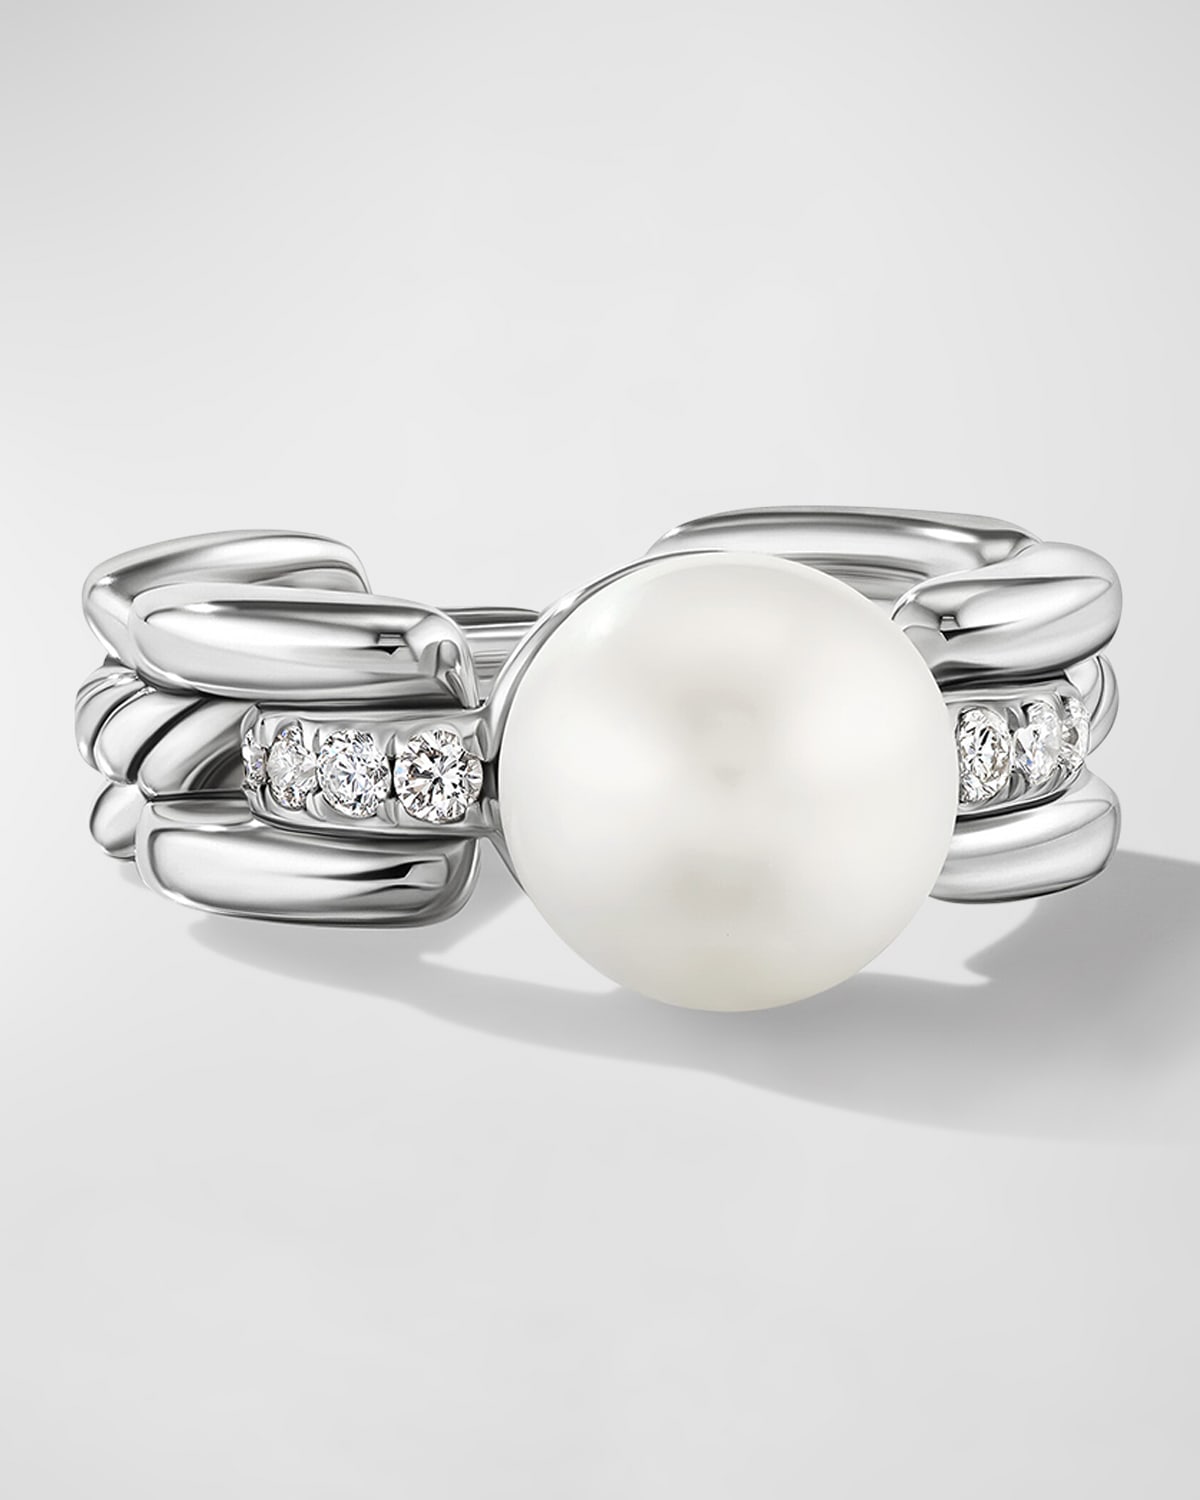 DY Madison Pearl Ring with Diamonds in Silver, 7.5mm